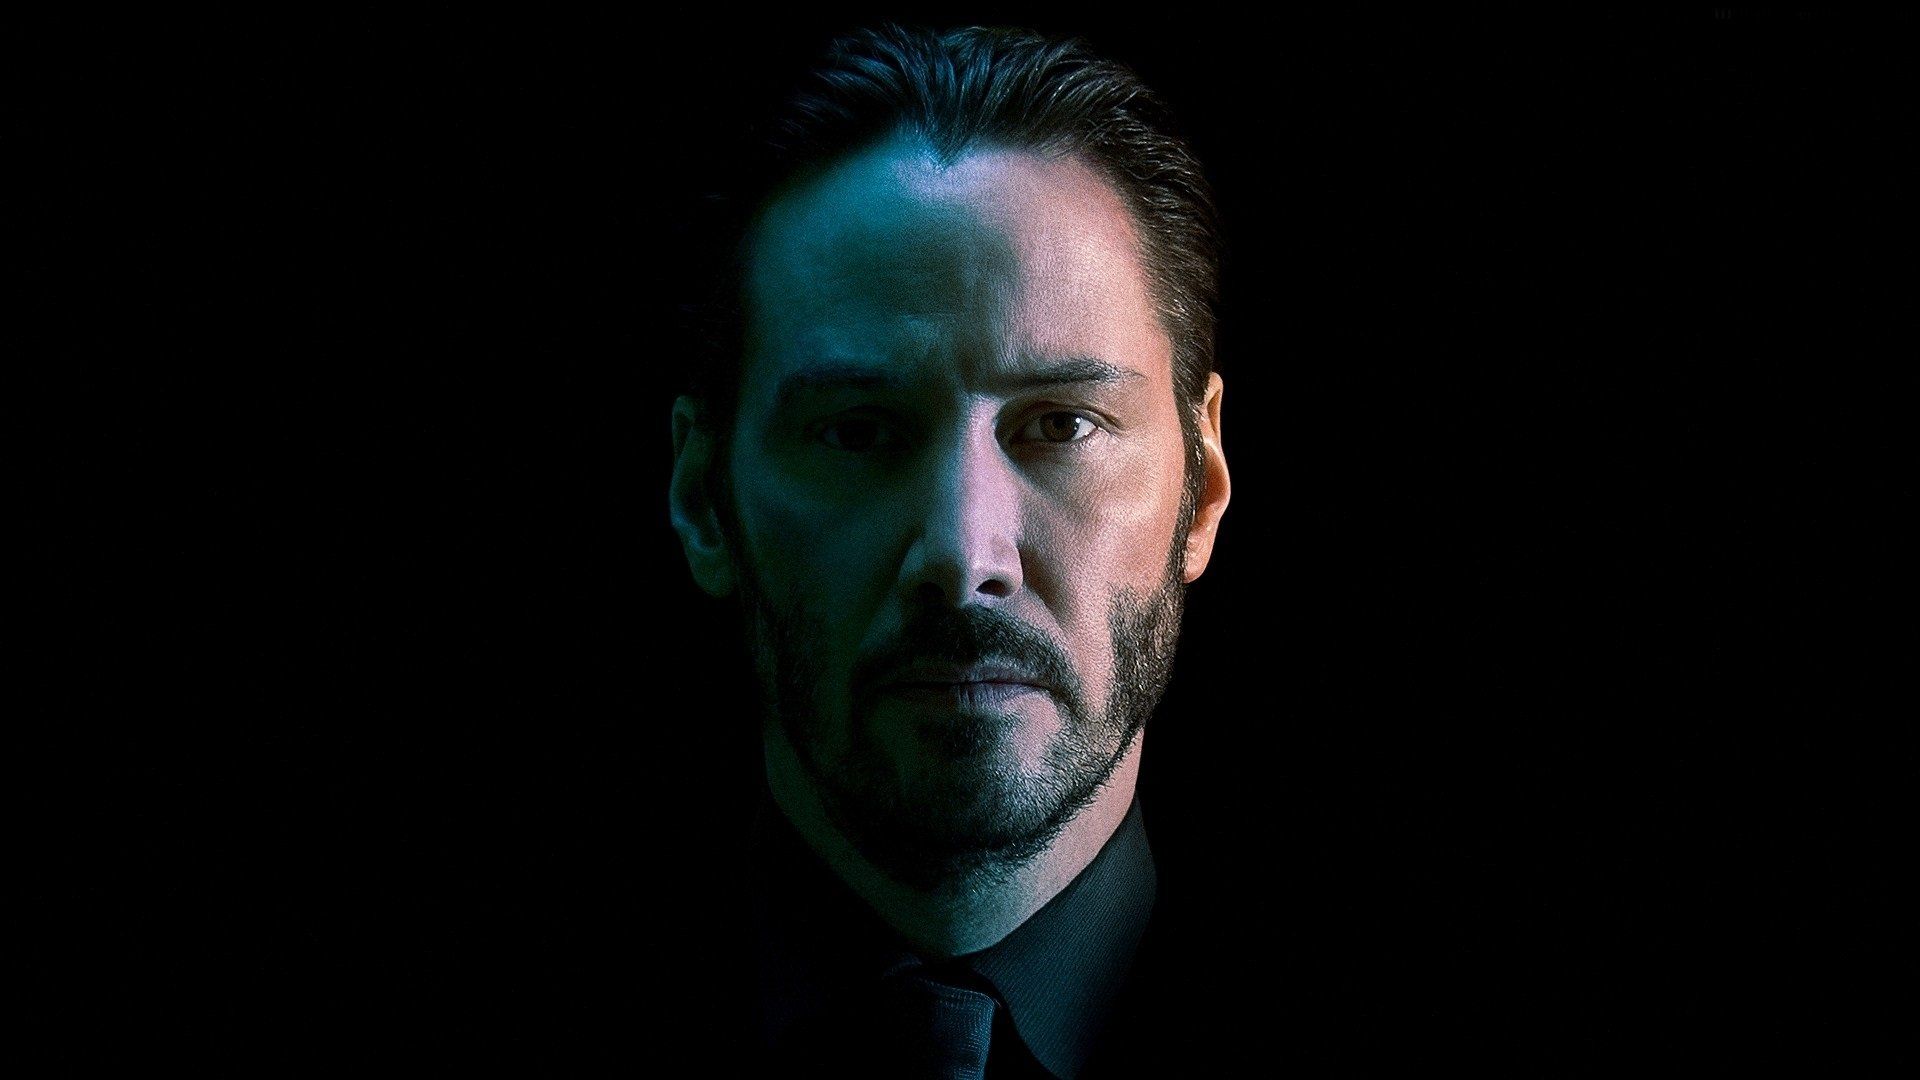 John Wick HD Wallpaper and Background Image